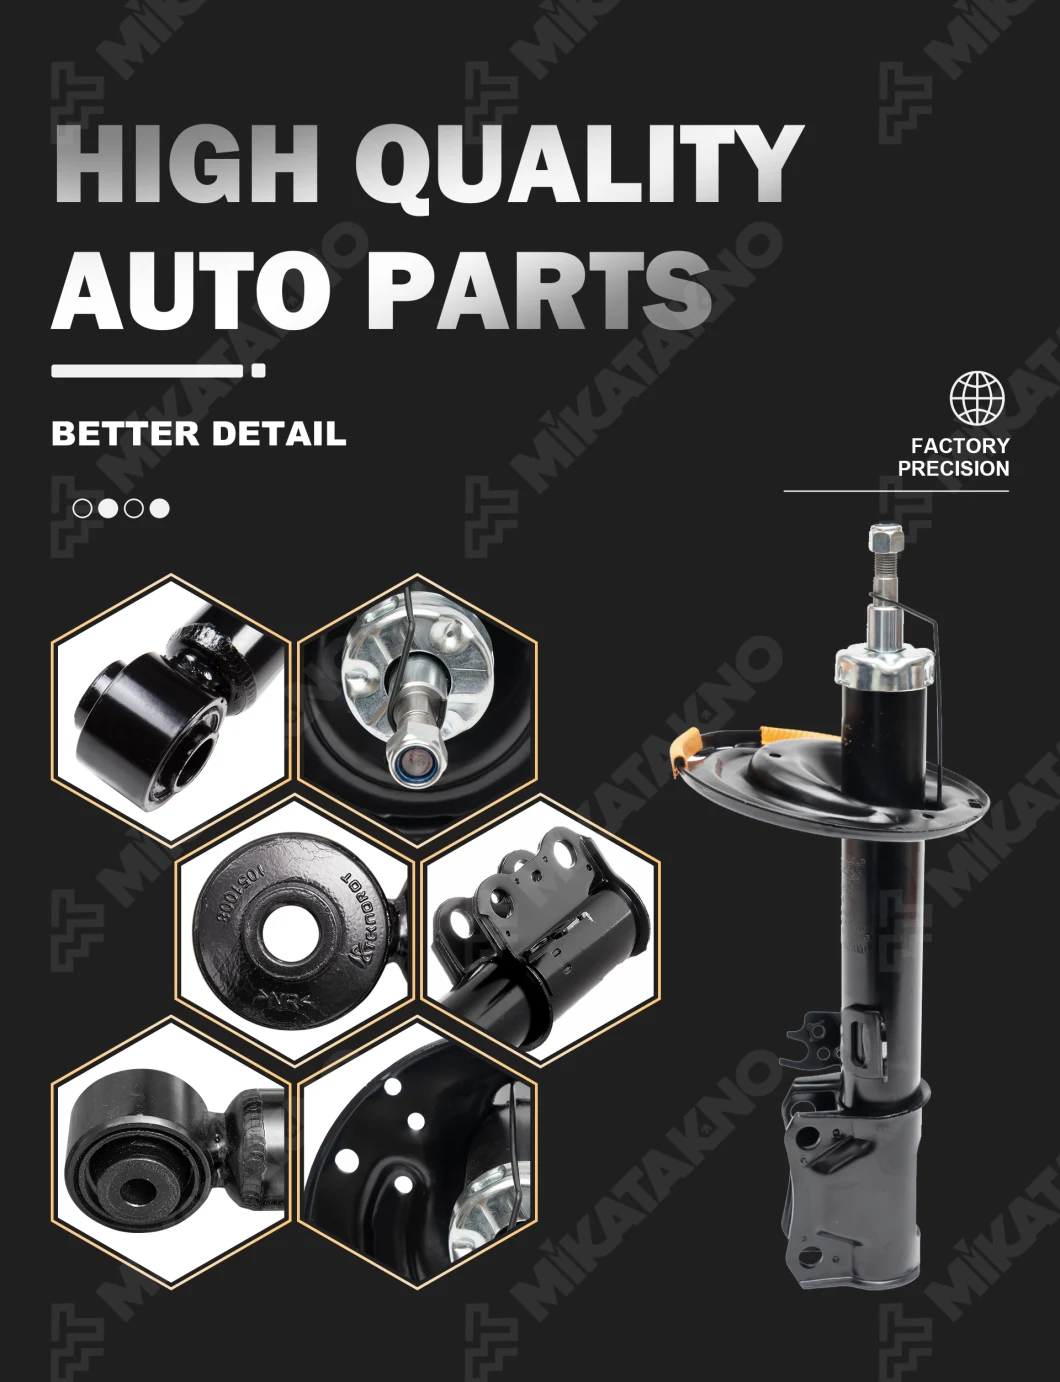 Mikatakno Absorber Shocks for All Types of Cars in High Quality and Factory Prices